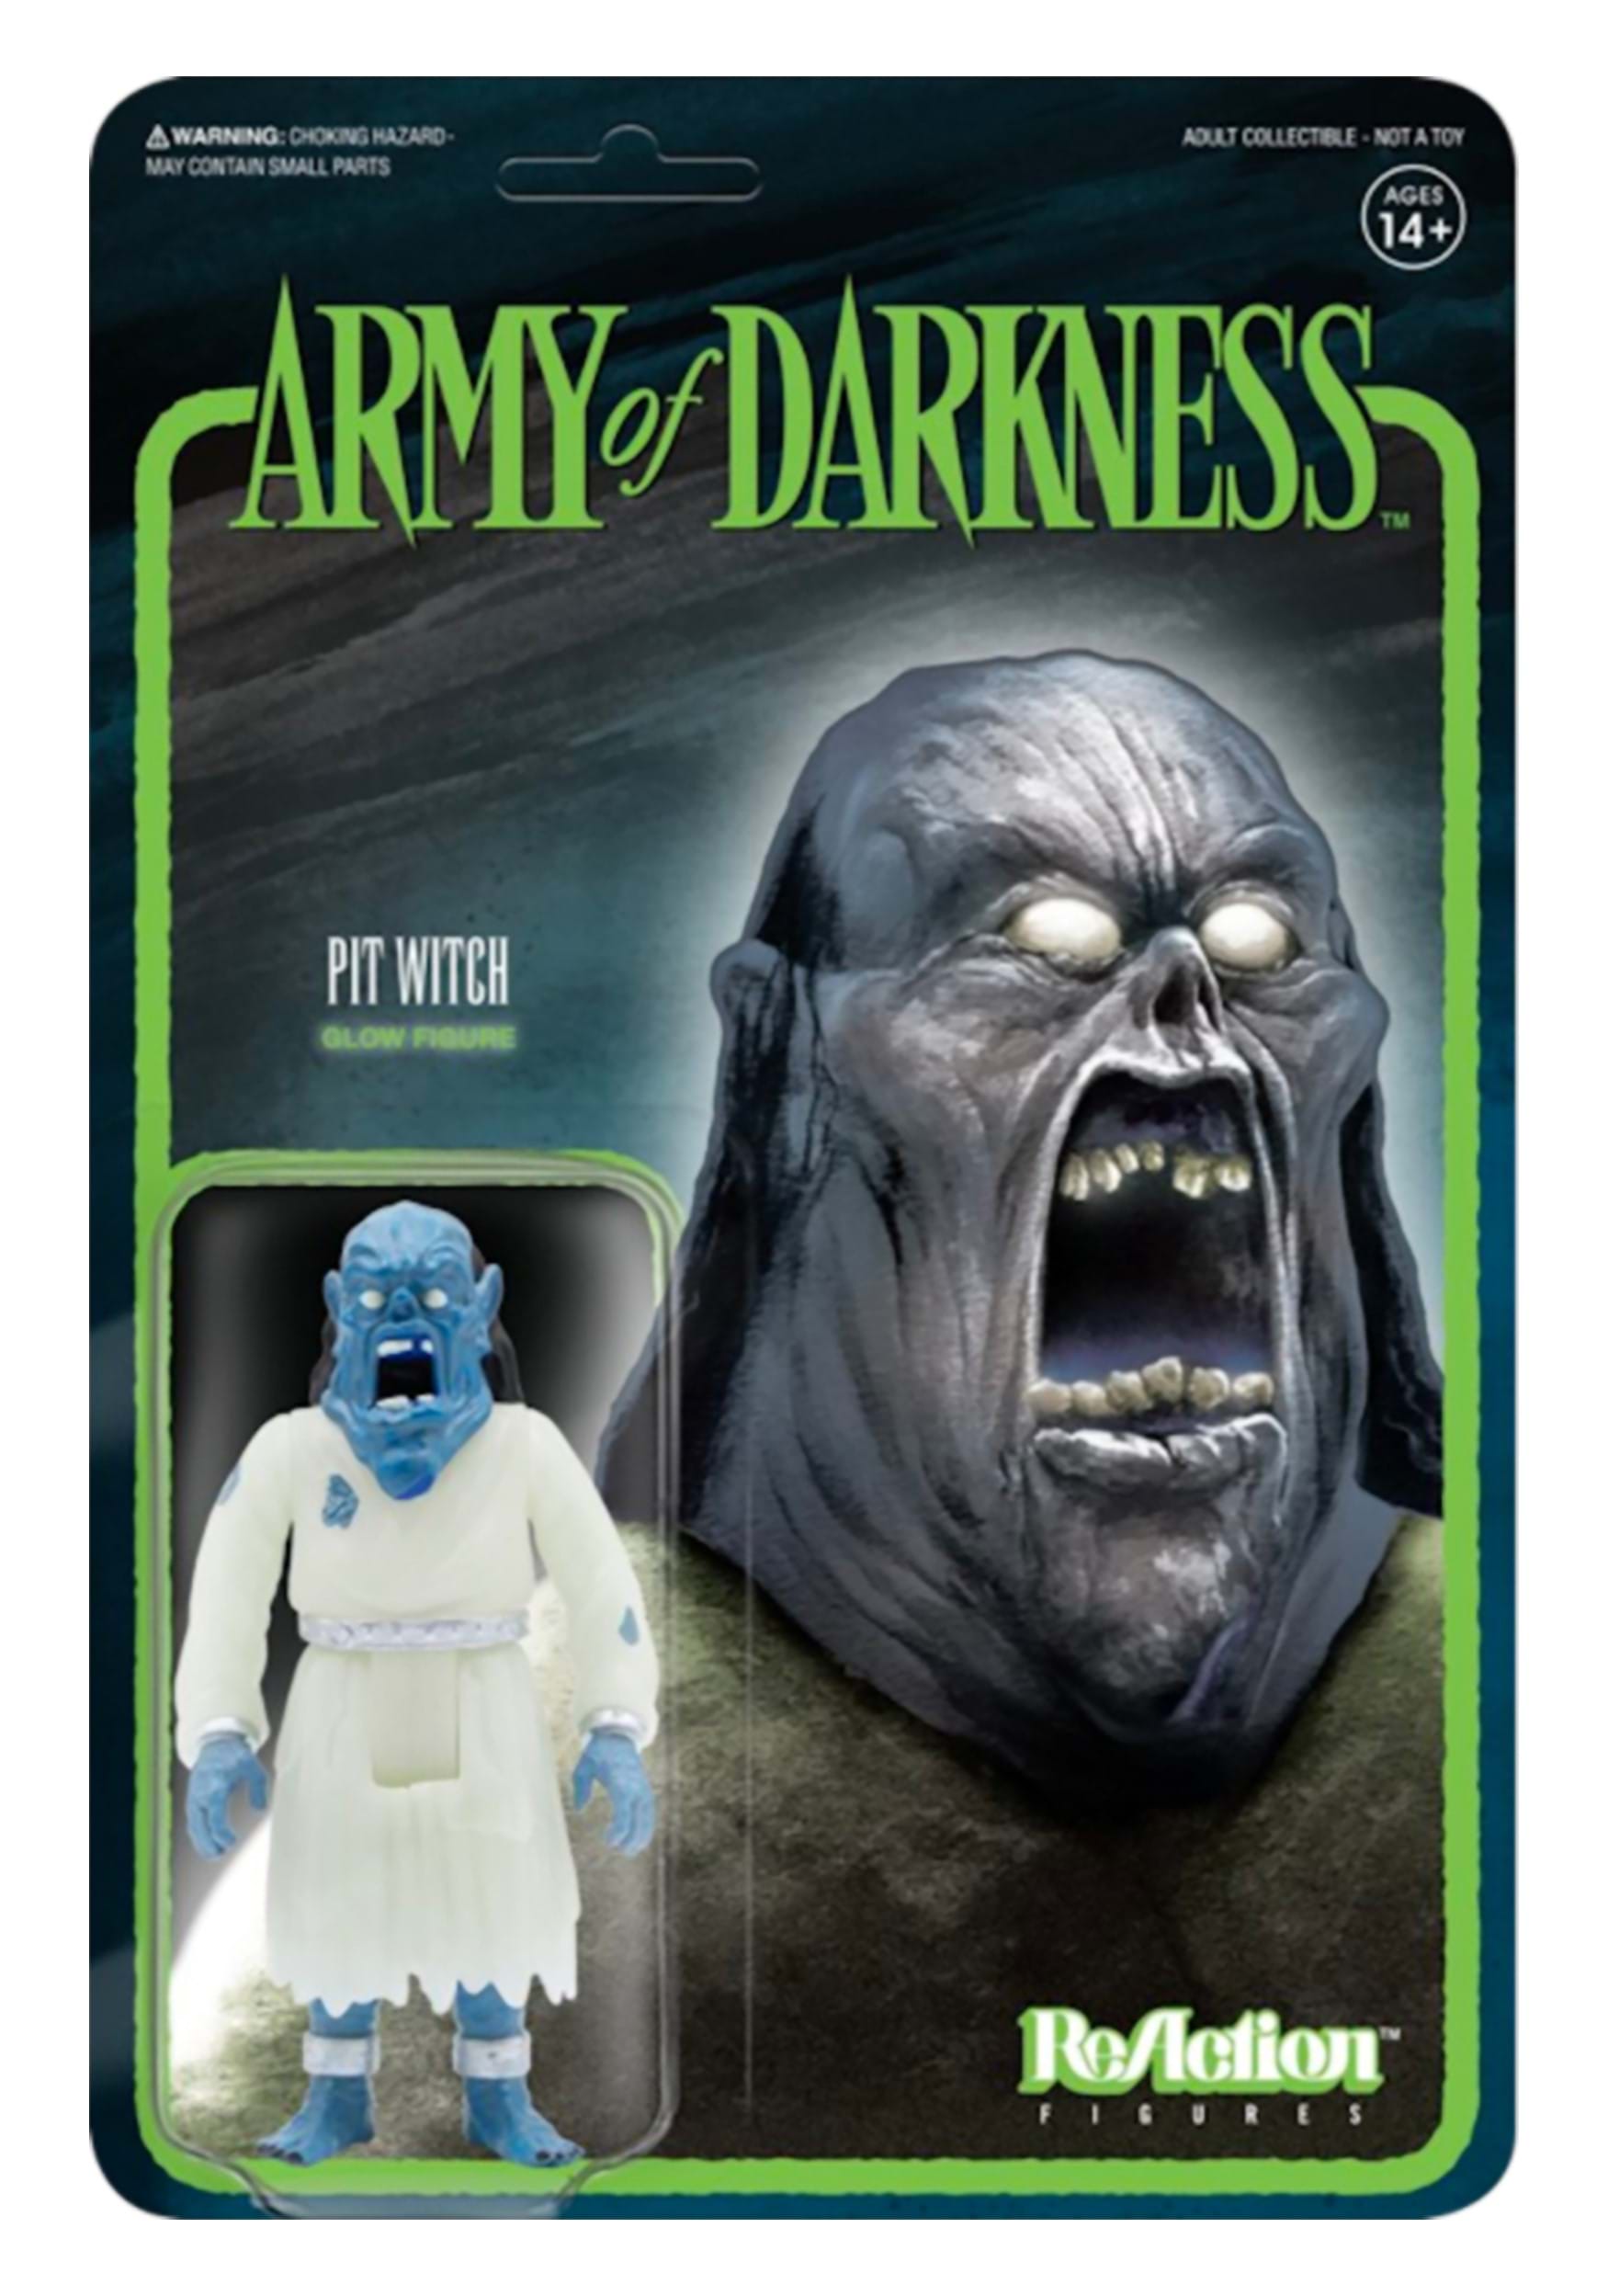 Army Of Darkness Pit Witch Glow in the Dark ReAction Figure